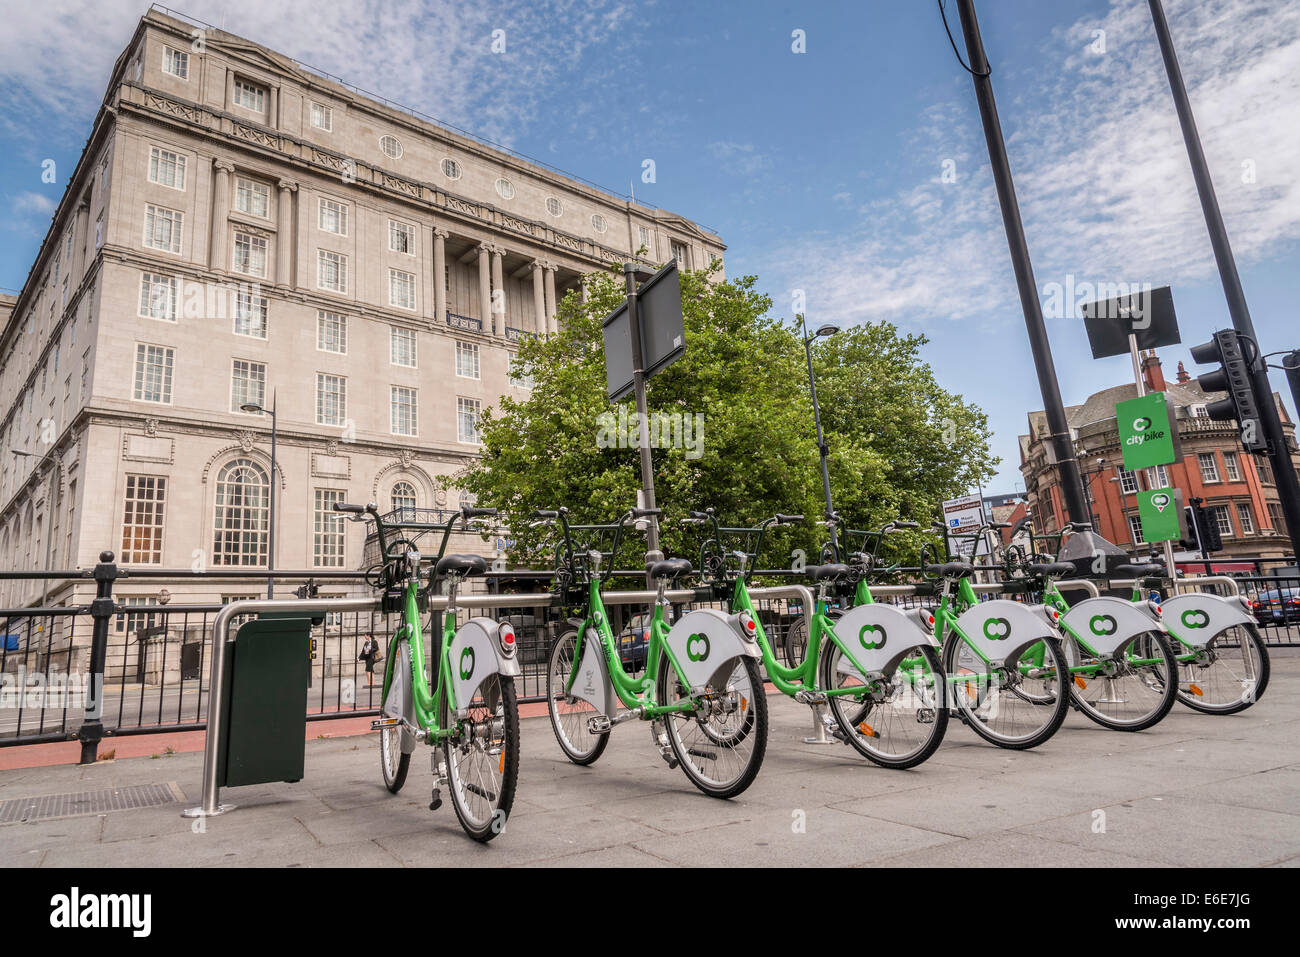 Liverpool North west England Merseyside. The Brittania Adelphi Hotel. Liverpool City Council City Bikes on a stand in the city c Stock Photo